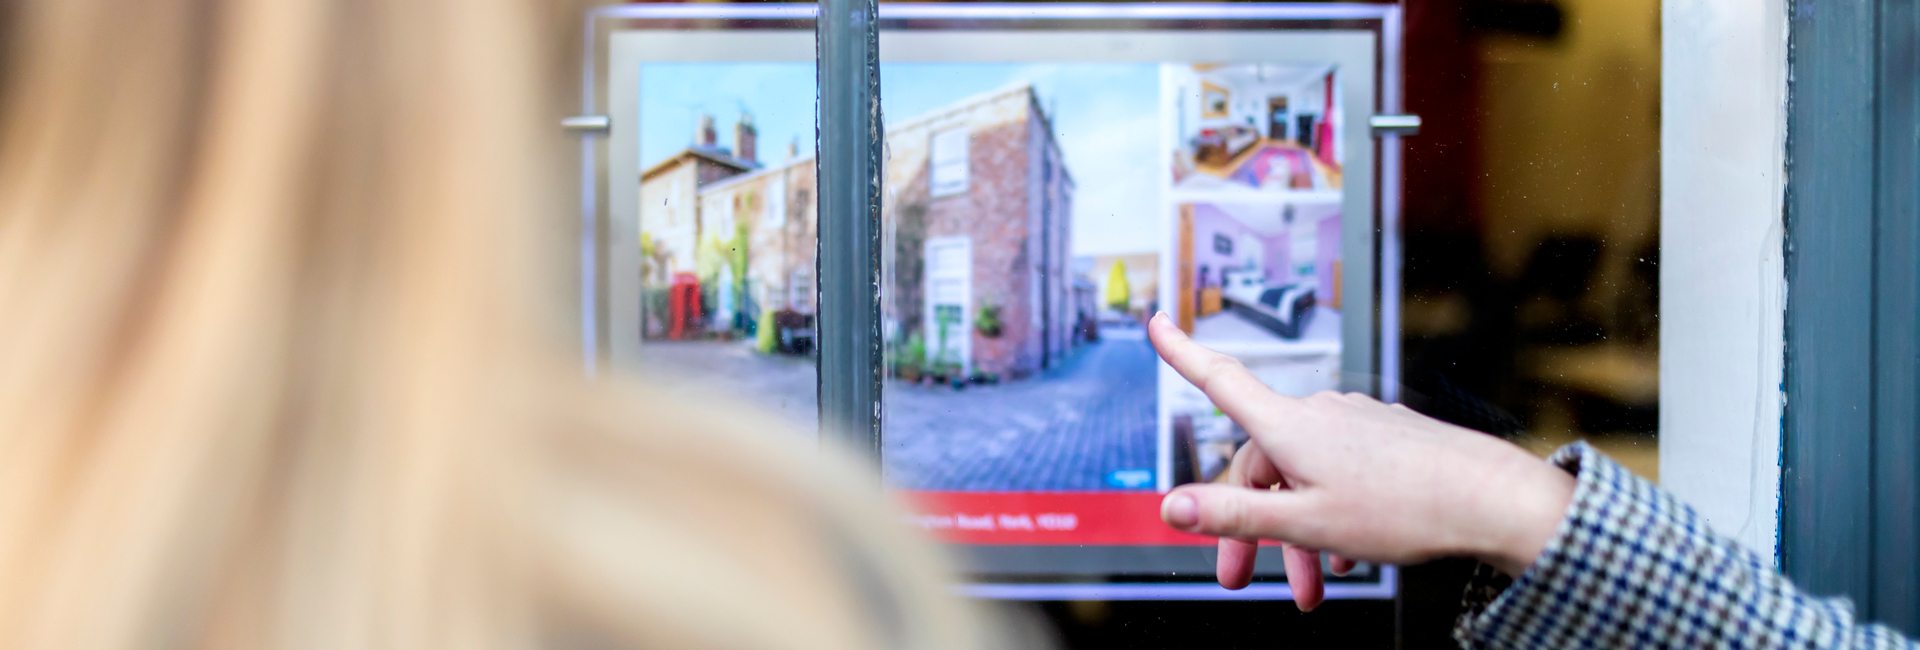 Two people look at a house for sale advert in an estate agent’s window